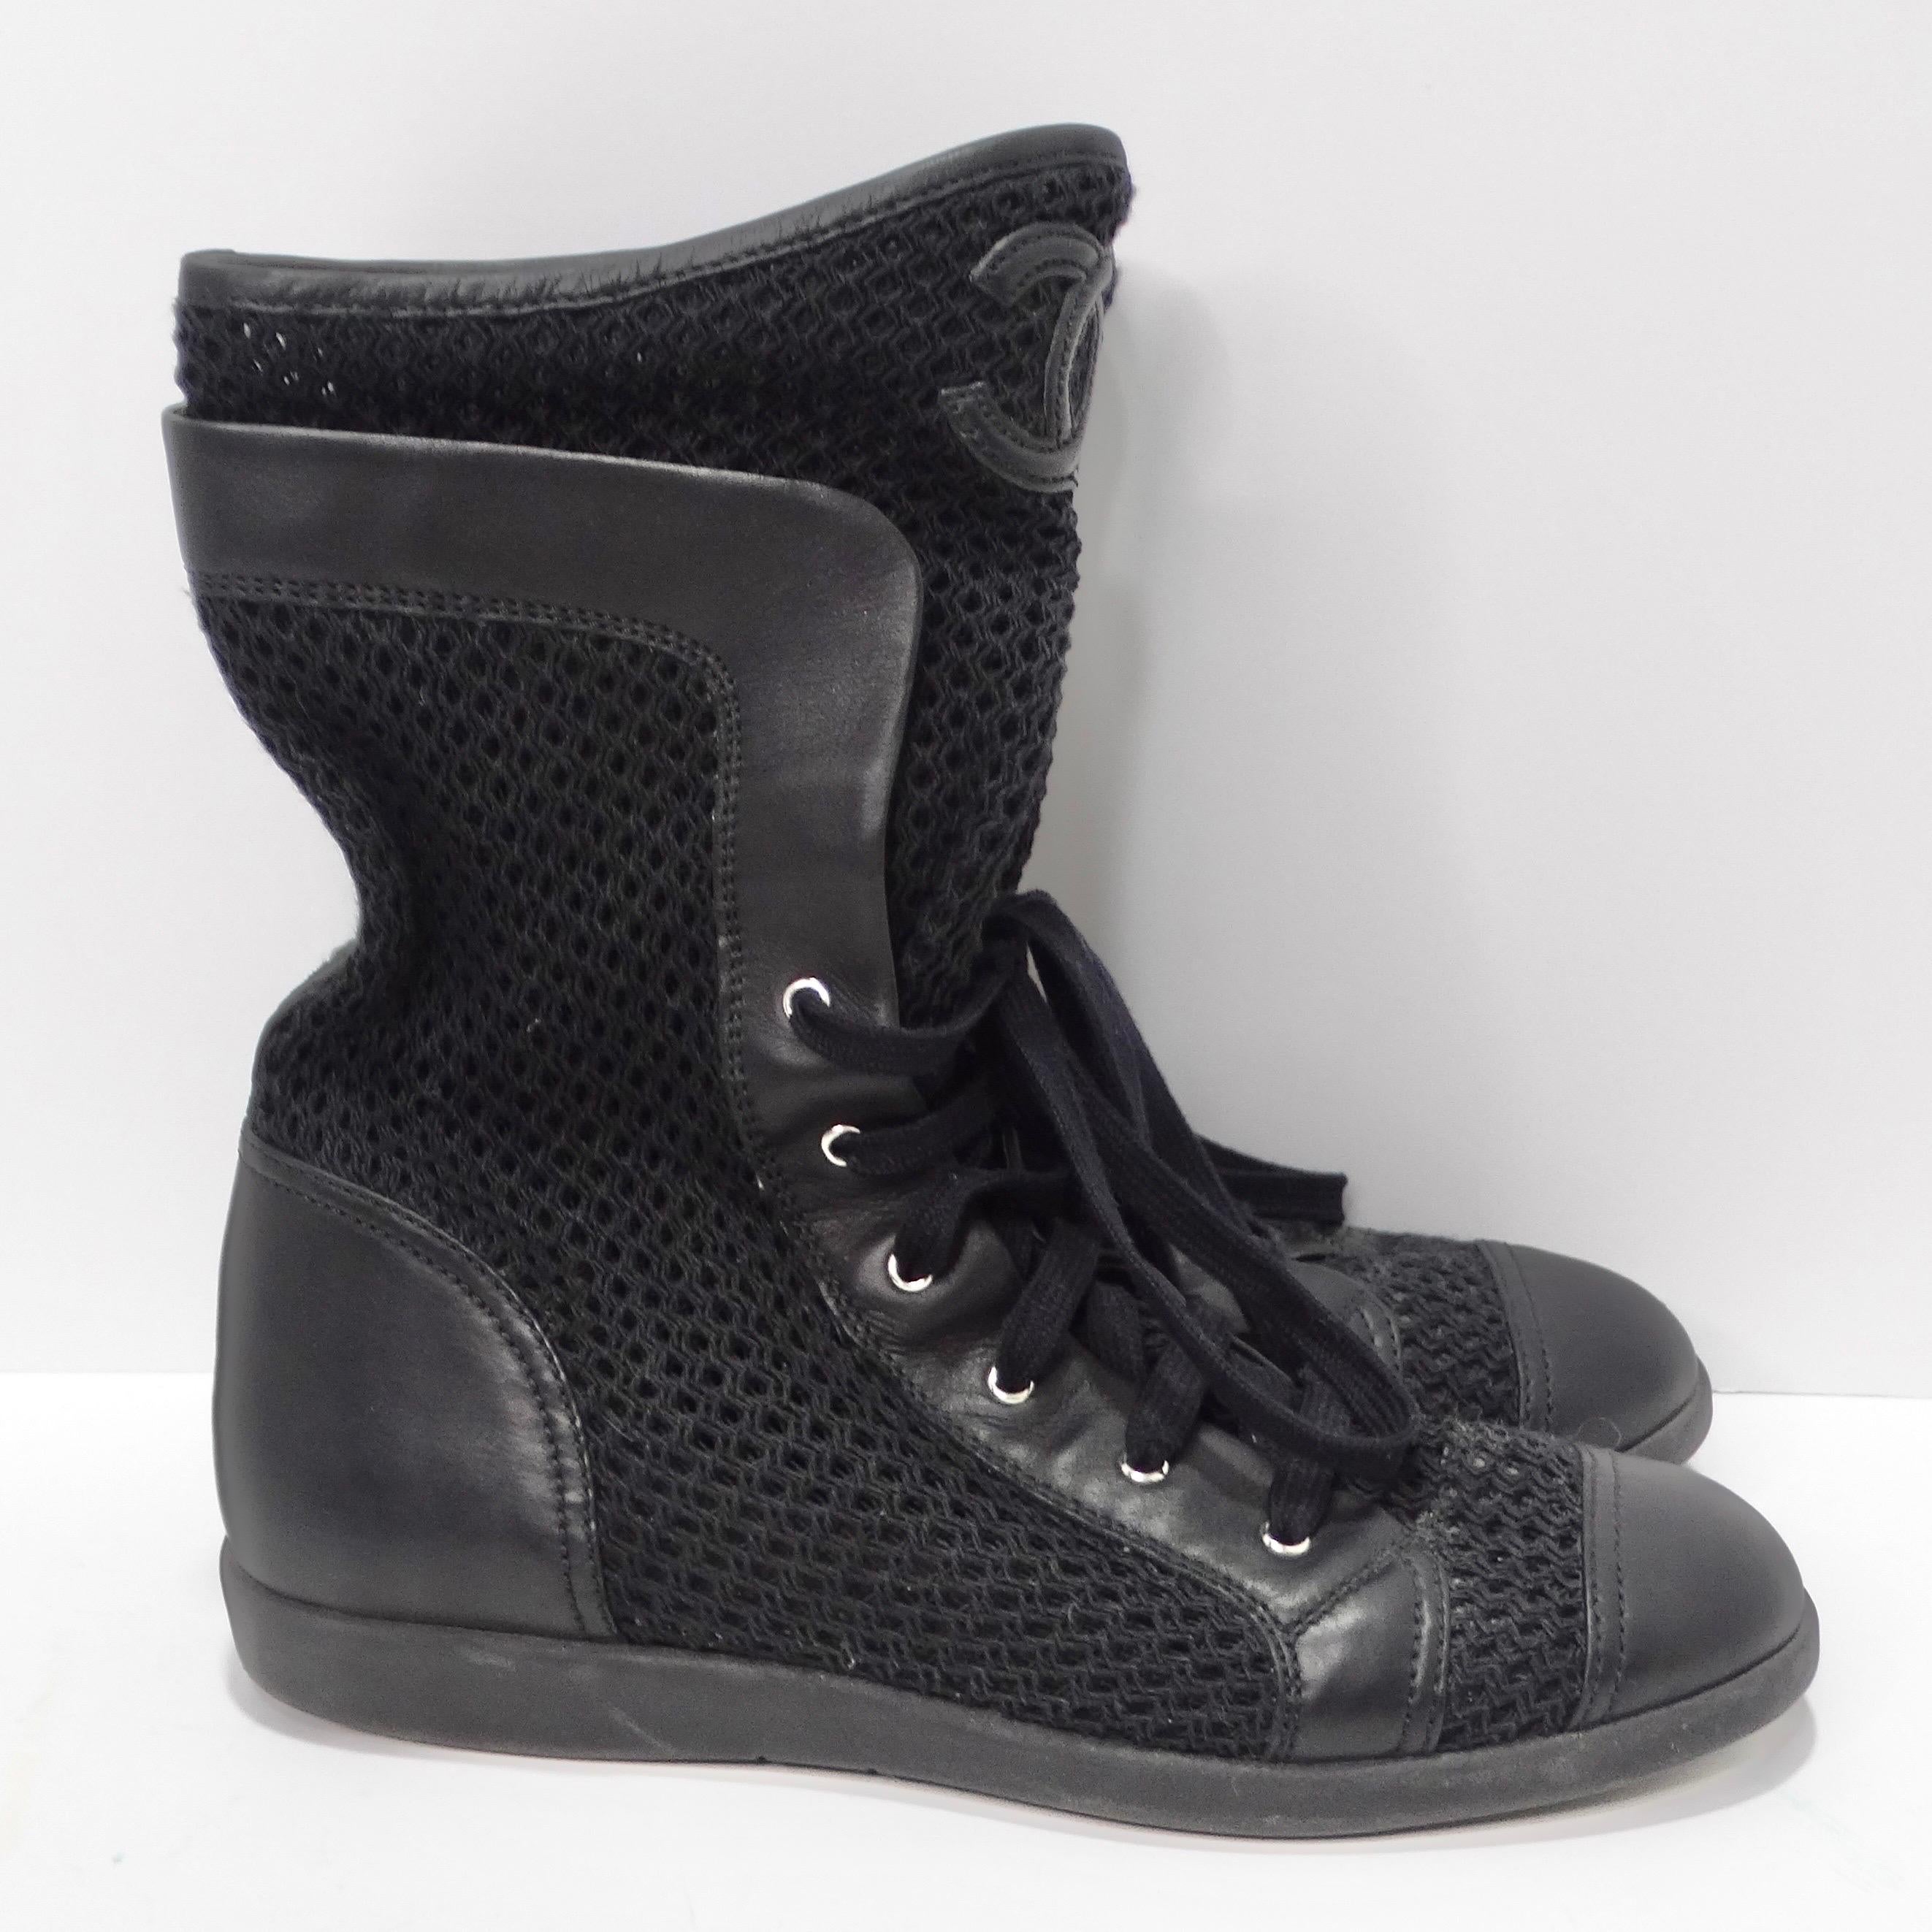 Chanel 1990s Black High Top Sneakers In Good Condition For Sale In Scottsdale, AZ